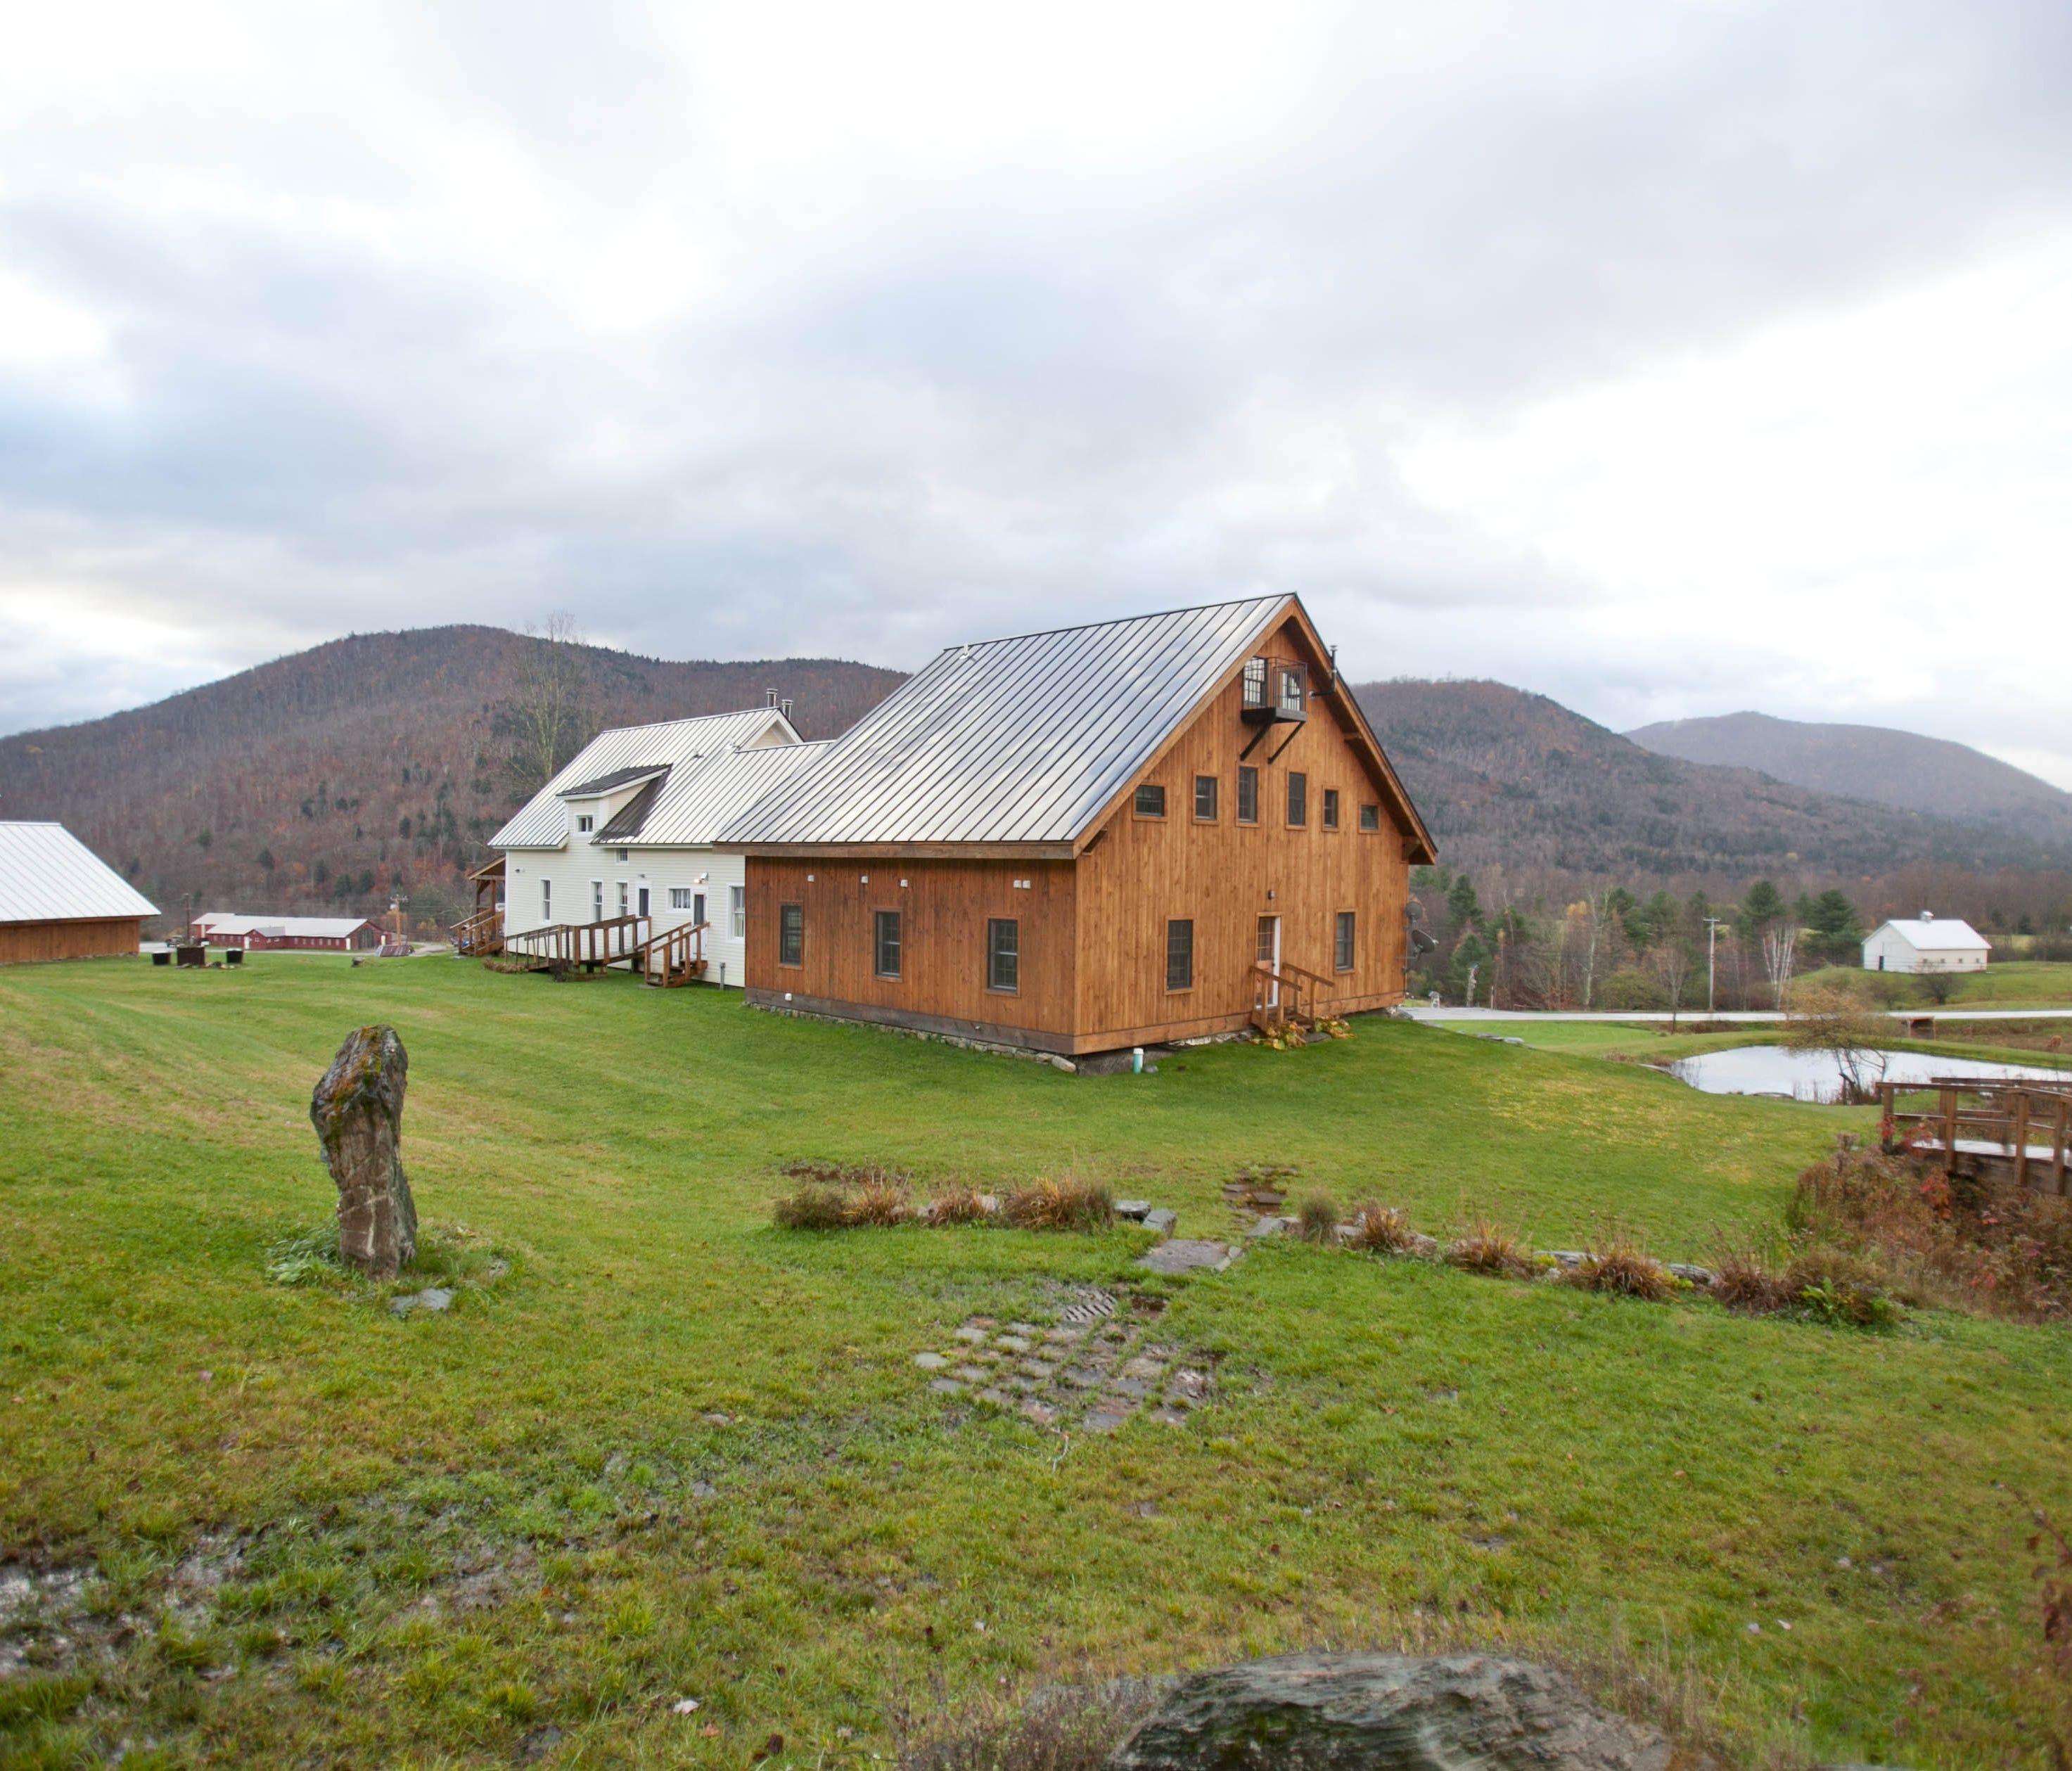 Amee Farm, Vermont: Set on 40 acres, Amee Farm isn't your typical bed-and-breakfast. Sure, it's warm and quaint and has plenty of charm to go around like all the rest, but the rooms here look like they could star in a chic home decor magazine. But do